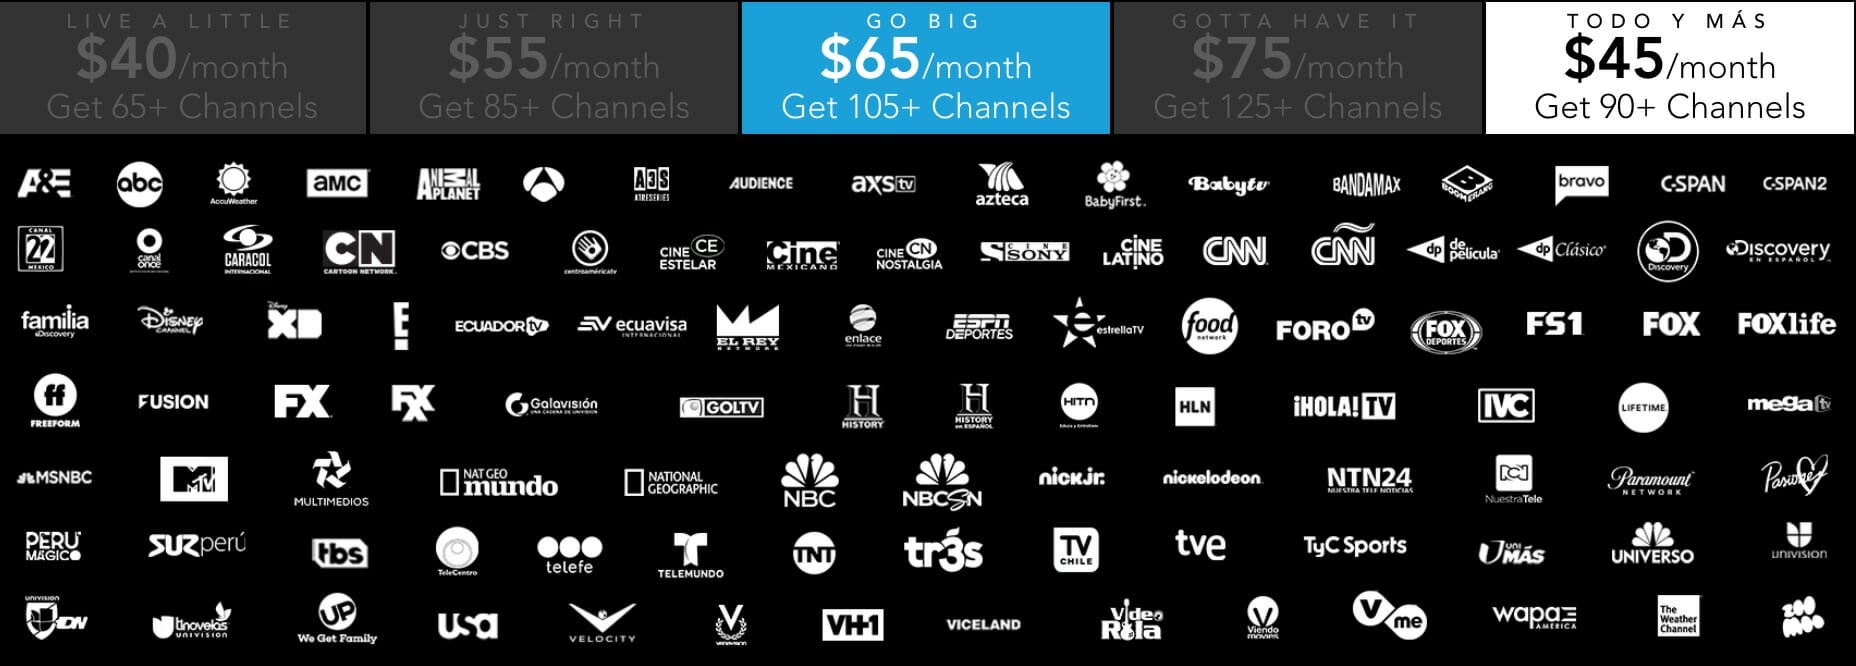 DirecTV Now Channels: The Complete DirecTV Now Channel Lineup